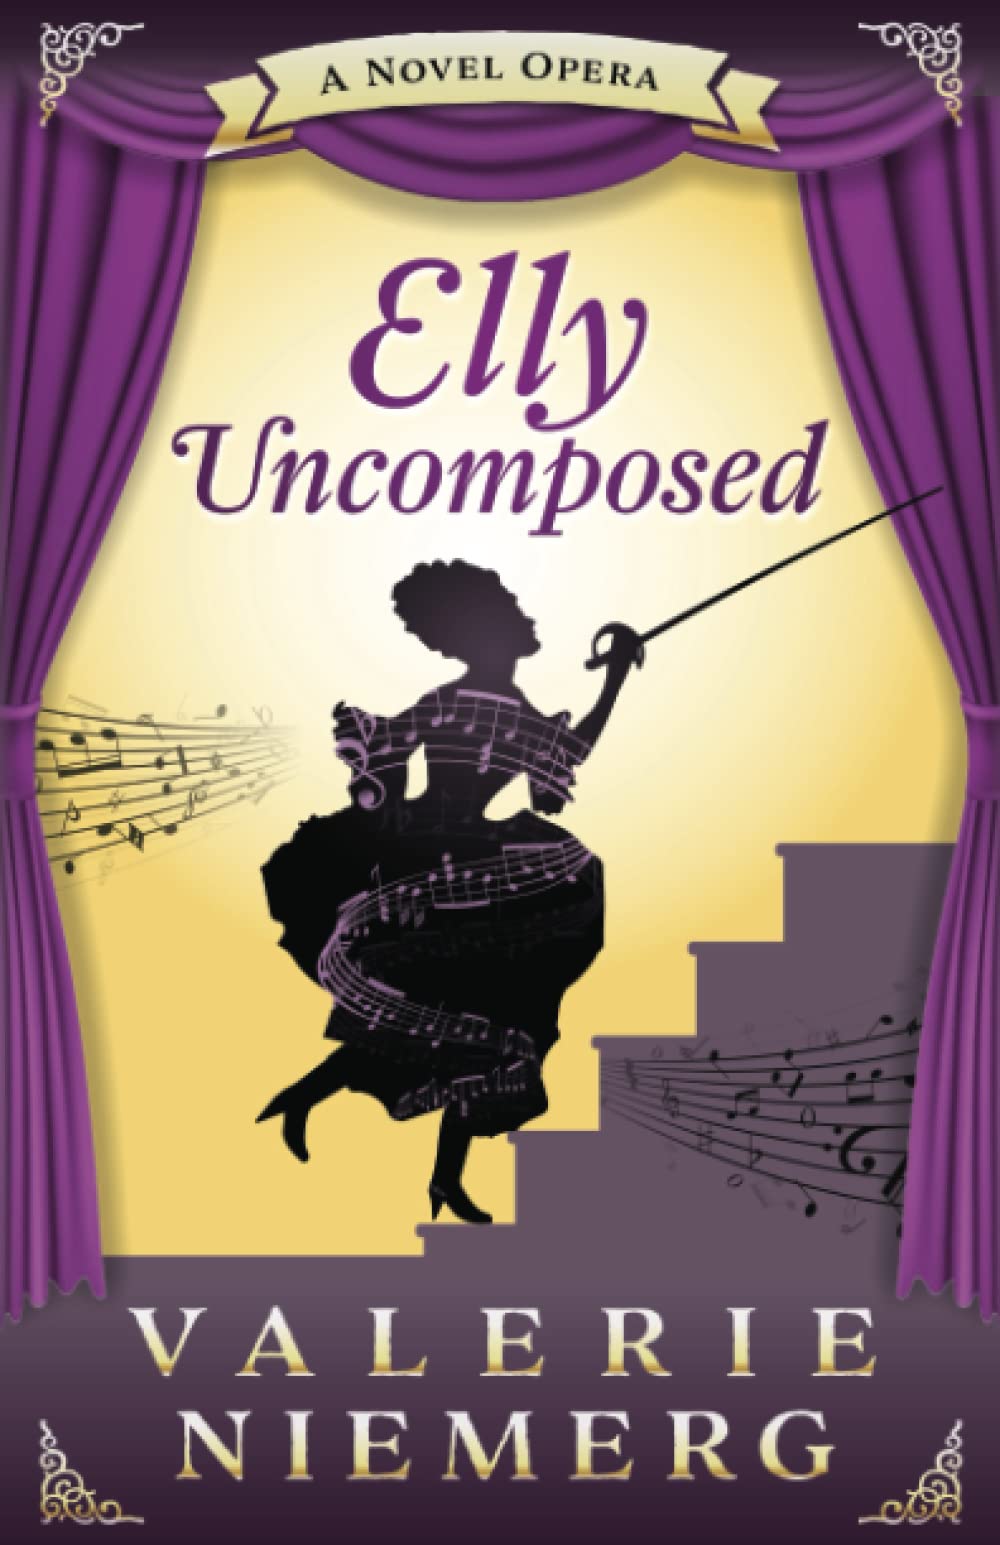 Elly Uncomposed